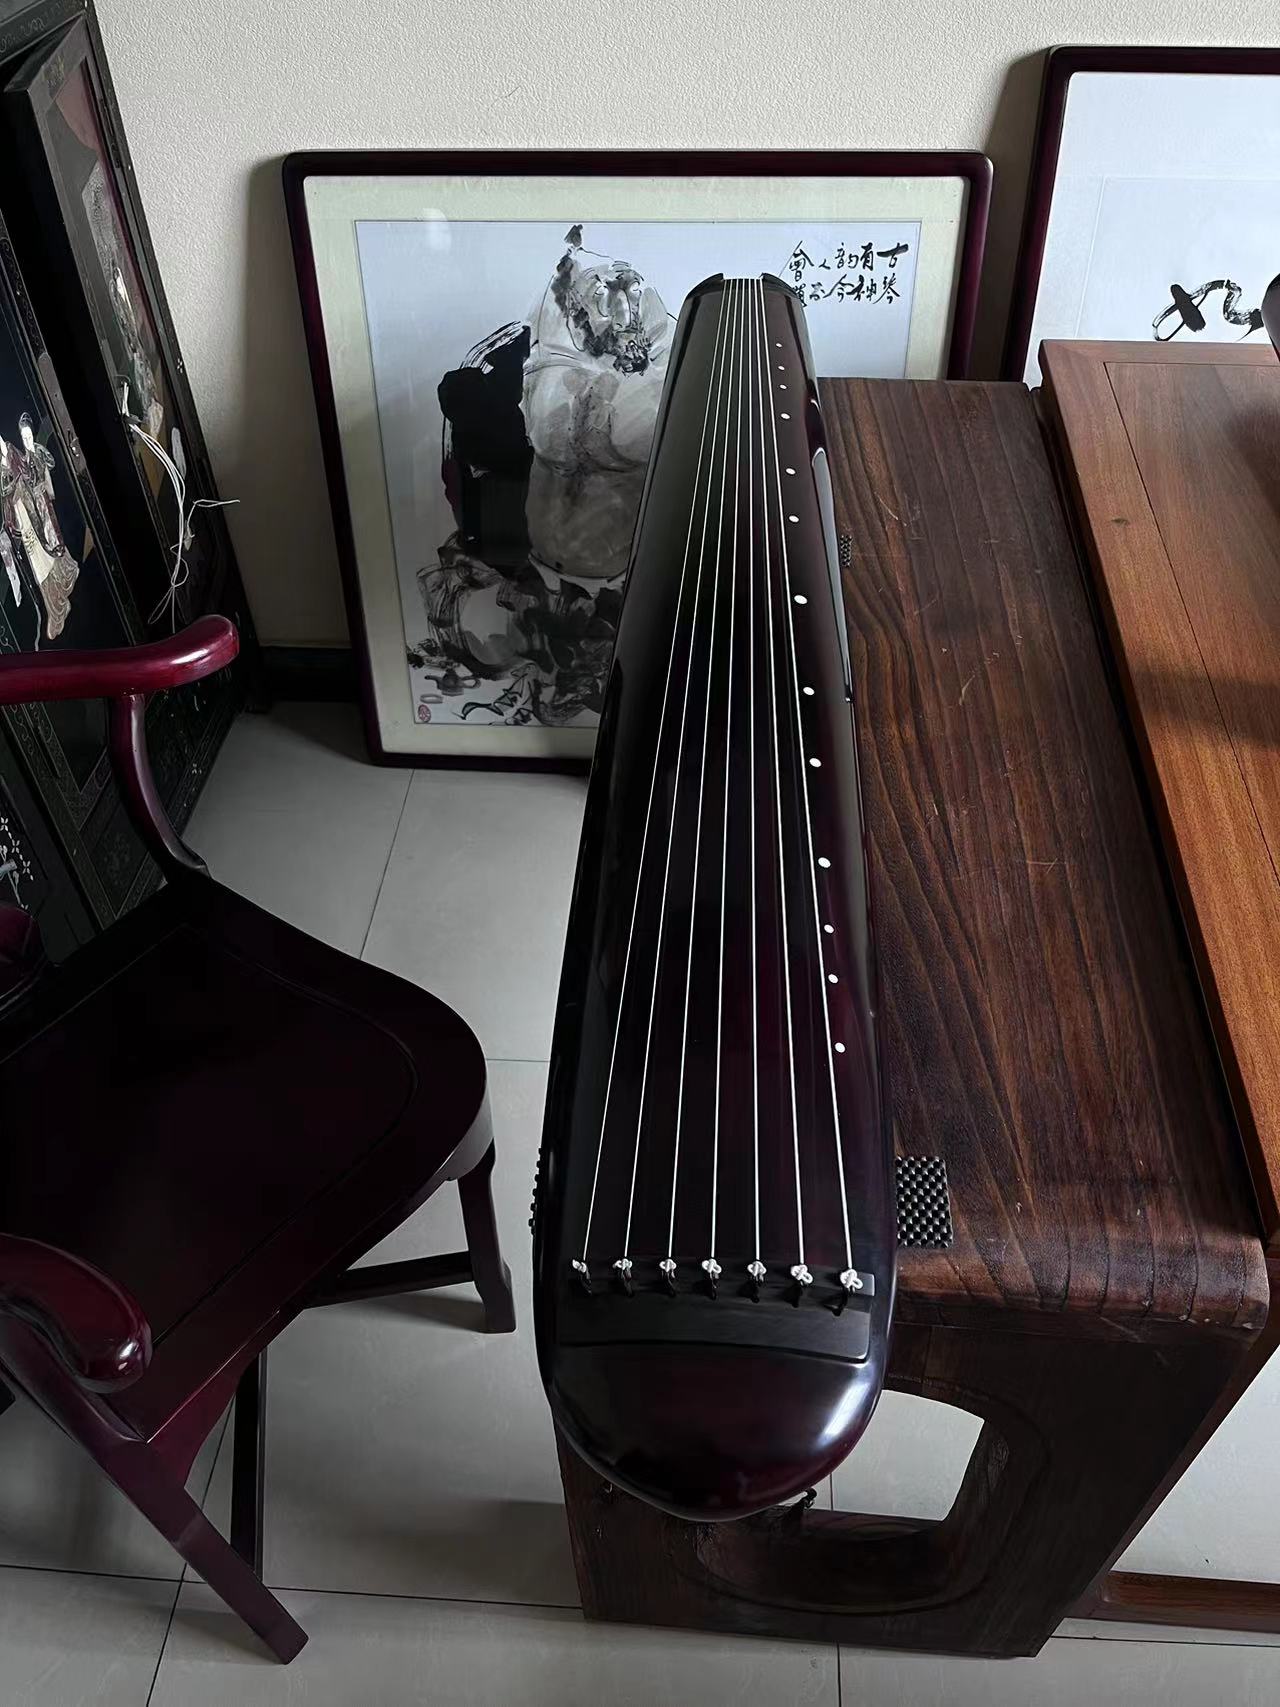 LANDTOM Collection Level Hundun style Chinese Zither Guqin for guzheng lovers